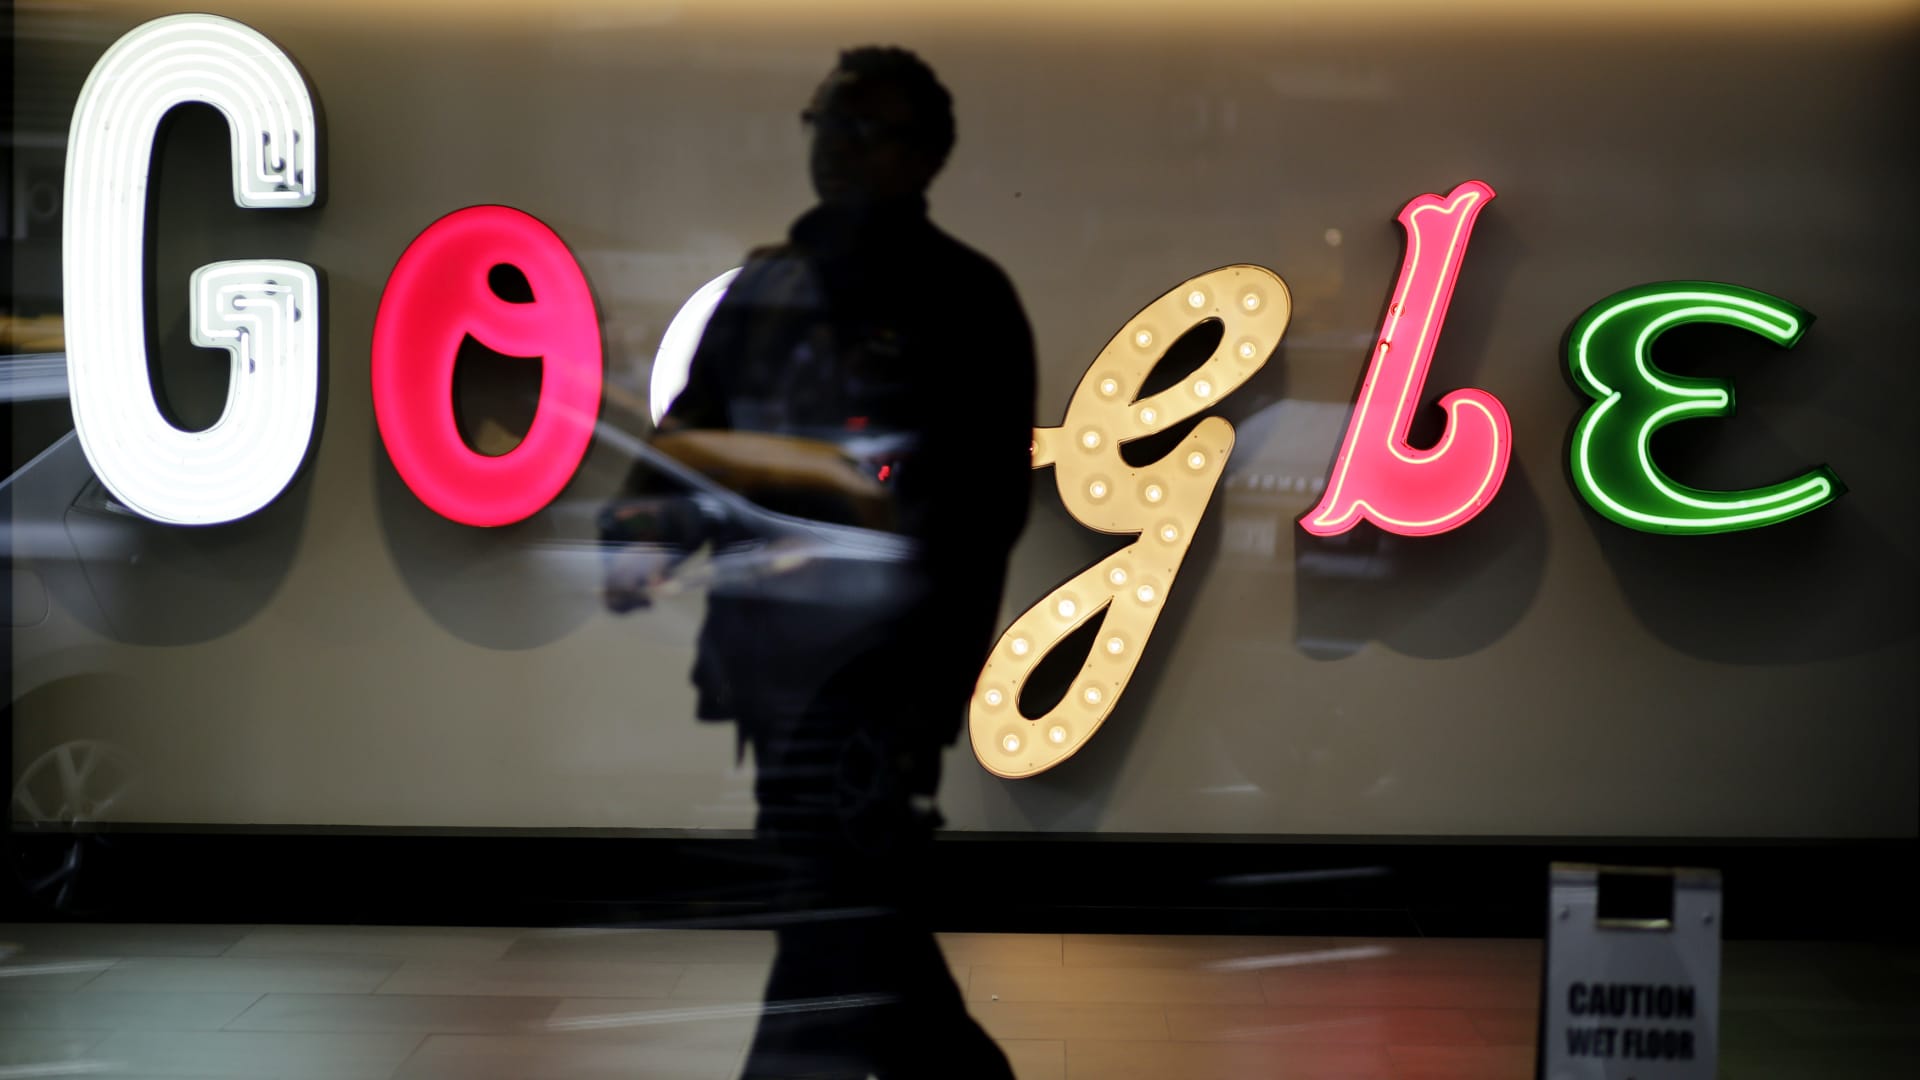 Google restricting internet access to some employees for security